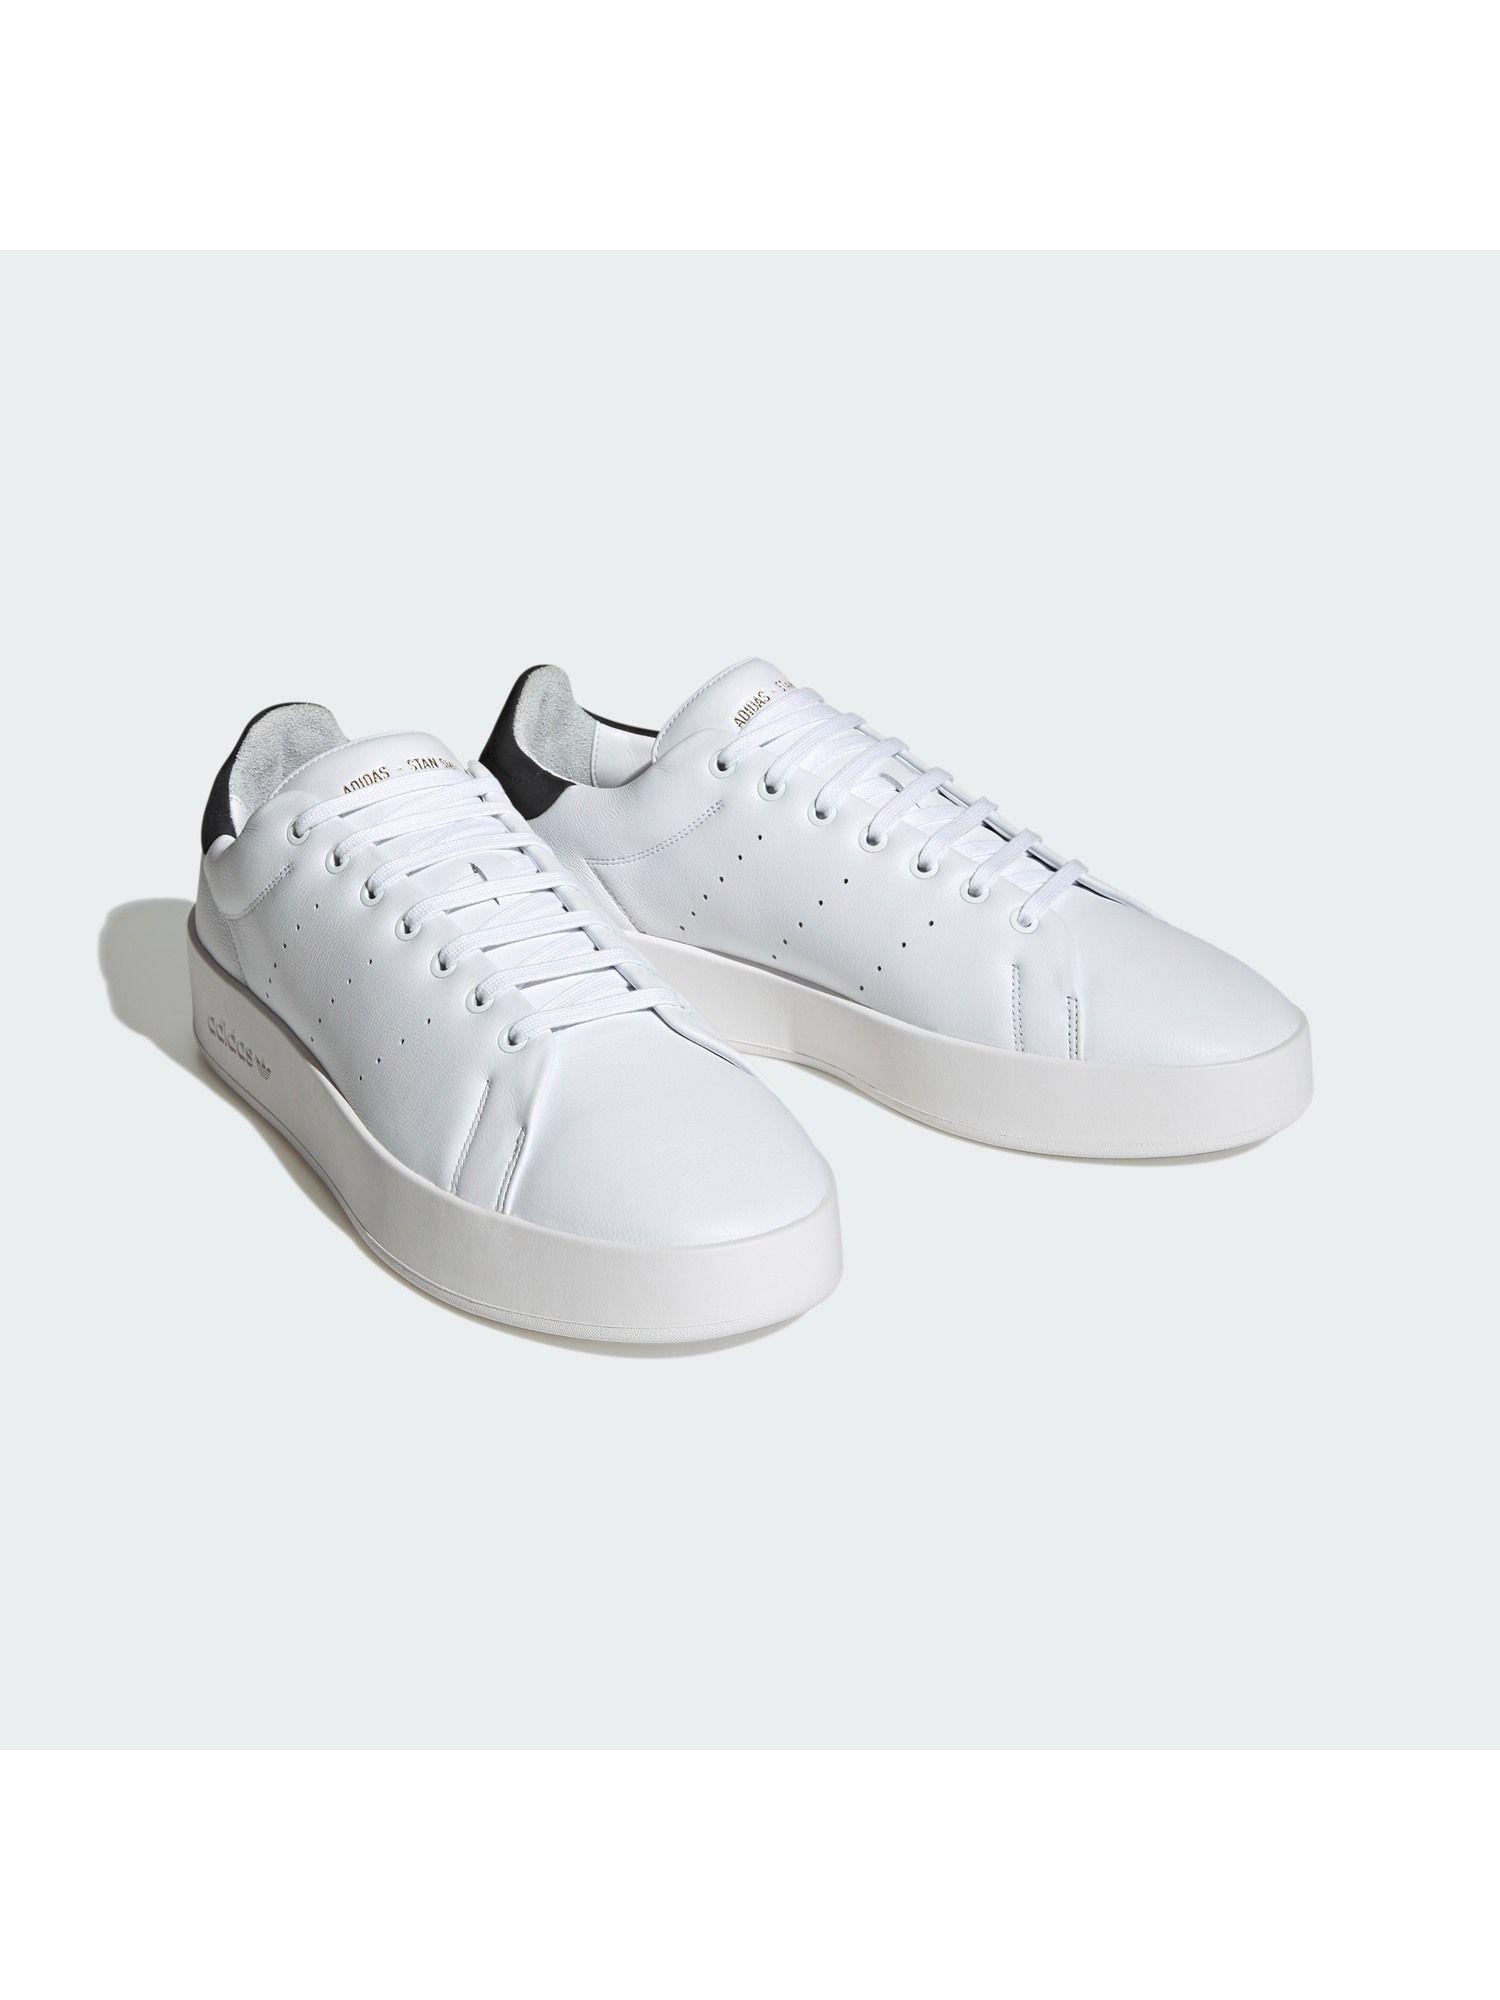 men-stan-smith-relasted-white-casual-sneaker-shoes